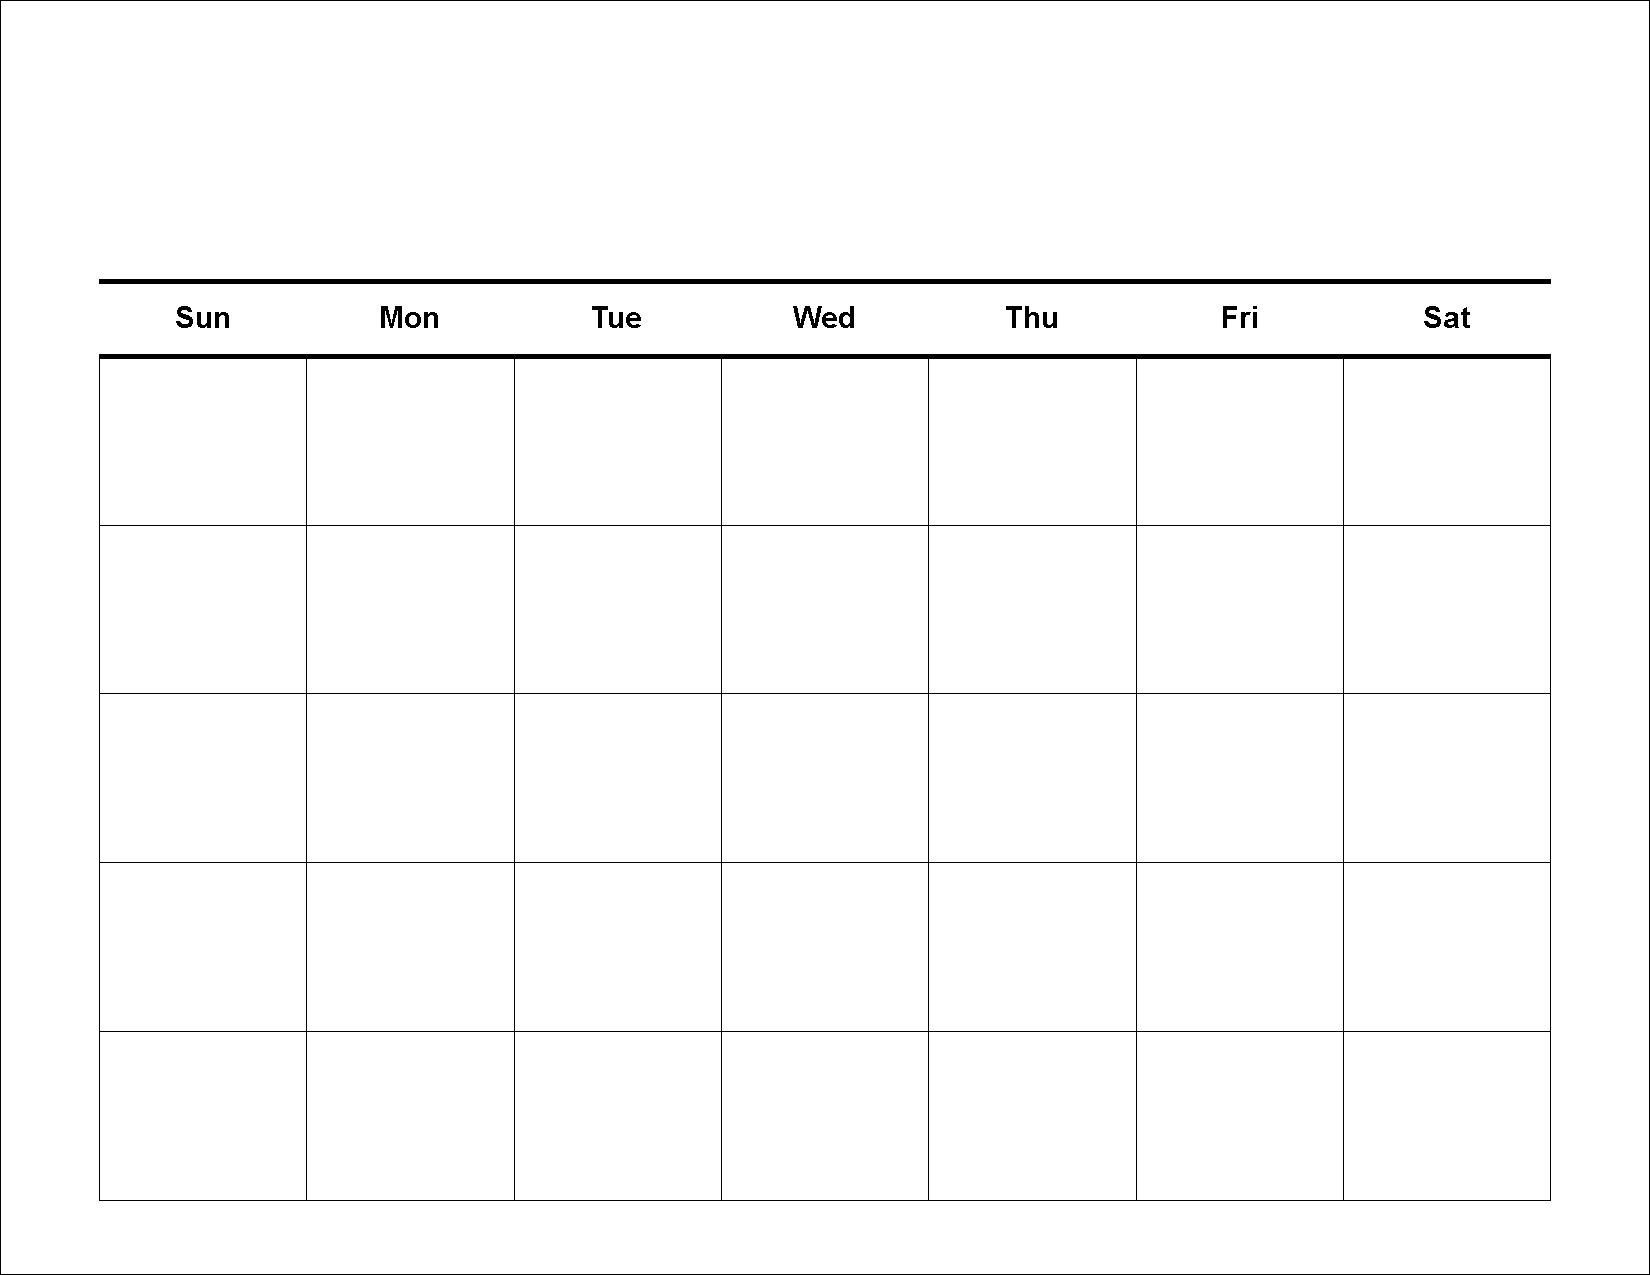 Extraordinary Blank Calendar Printable To Fill In In 2020 for Fill In Calendar Template